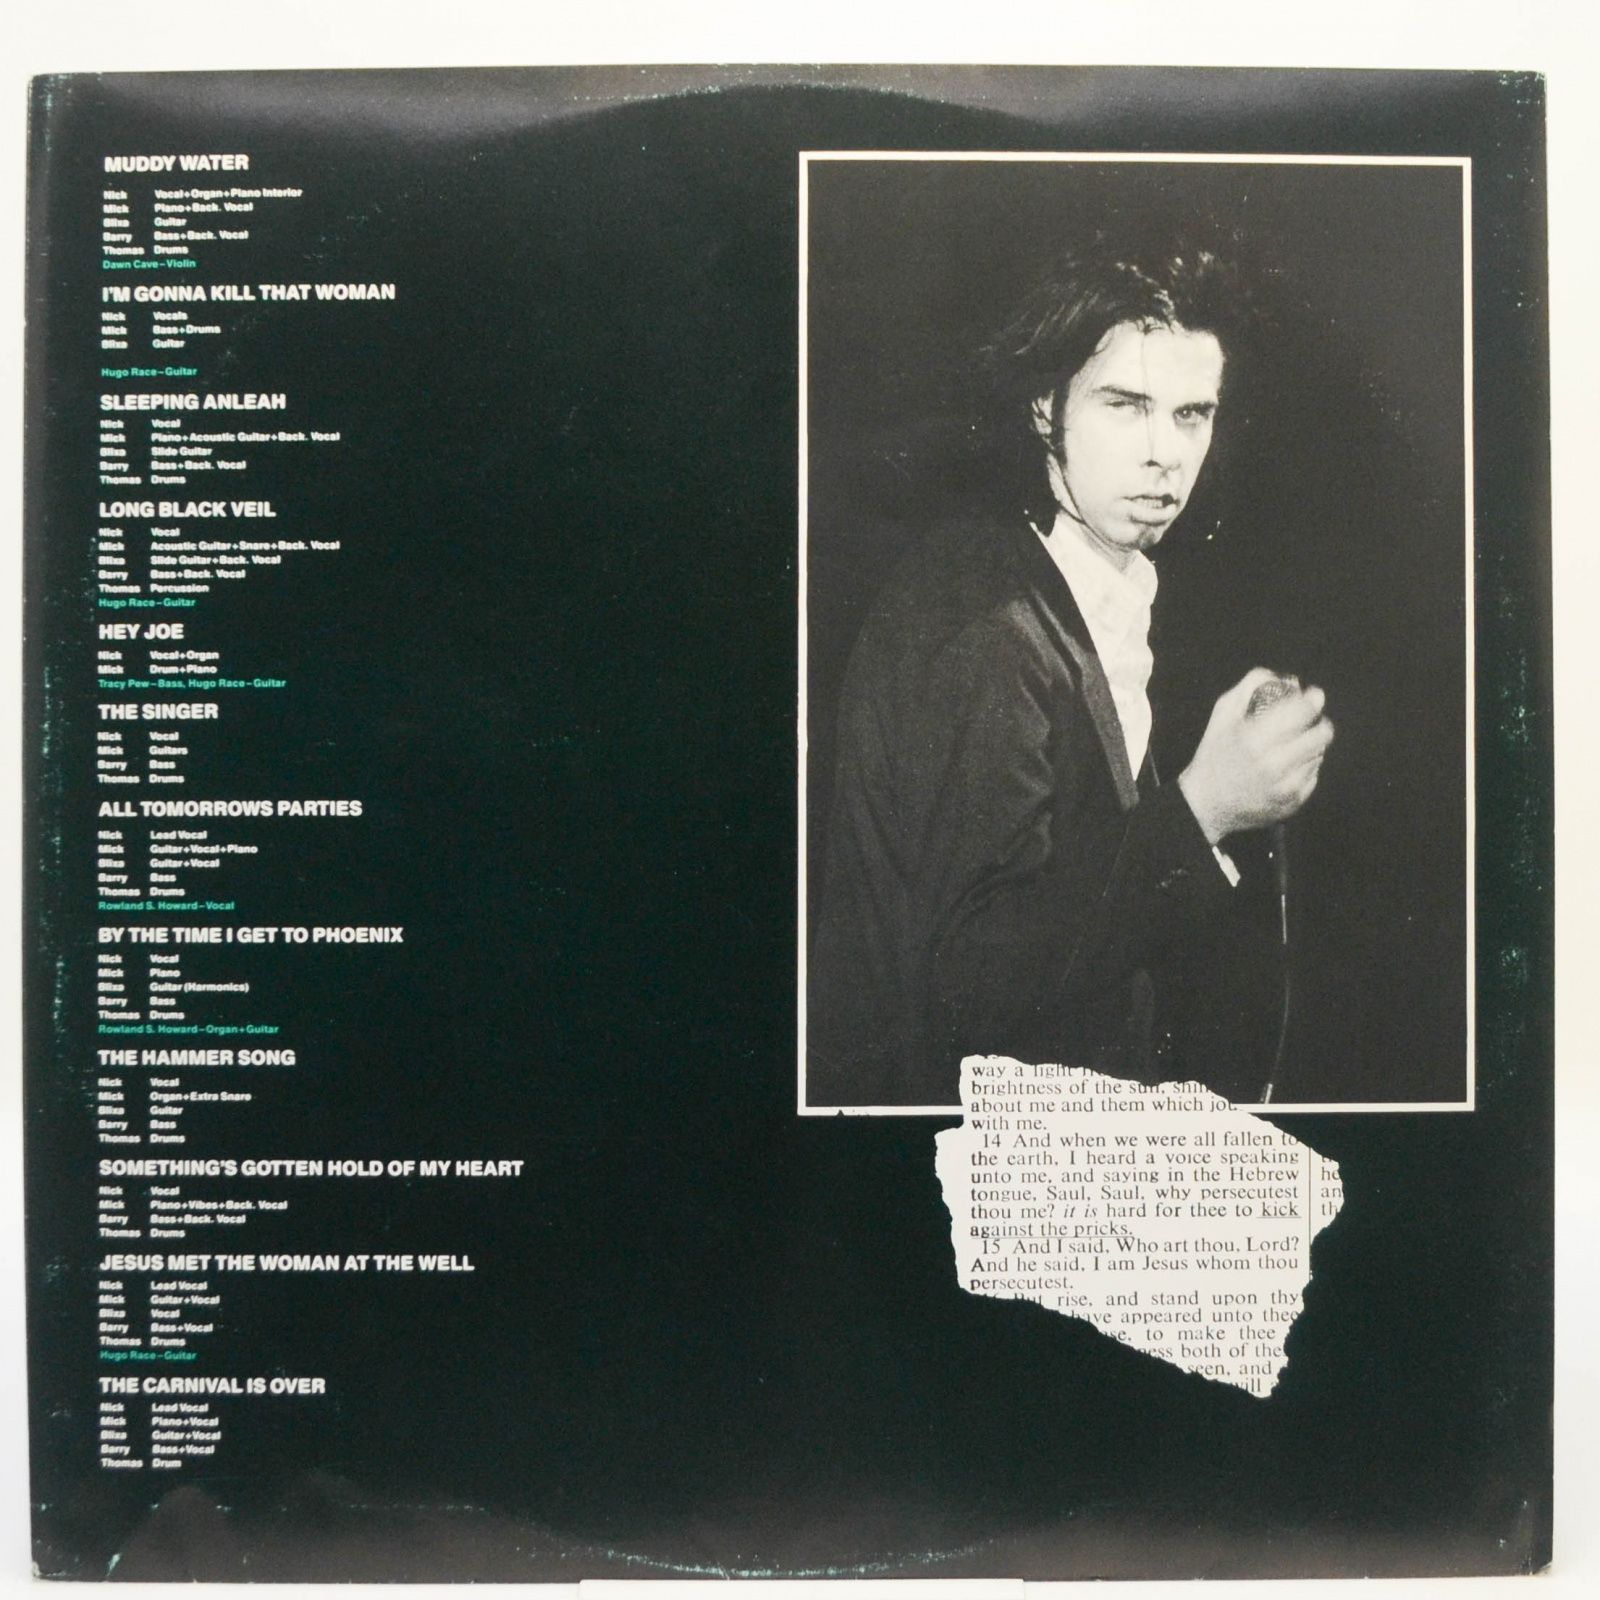 Nick Cave & The Bad Seeds — Kicking Against The Pricks, 1986